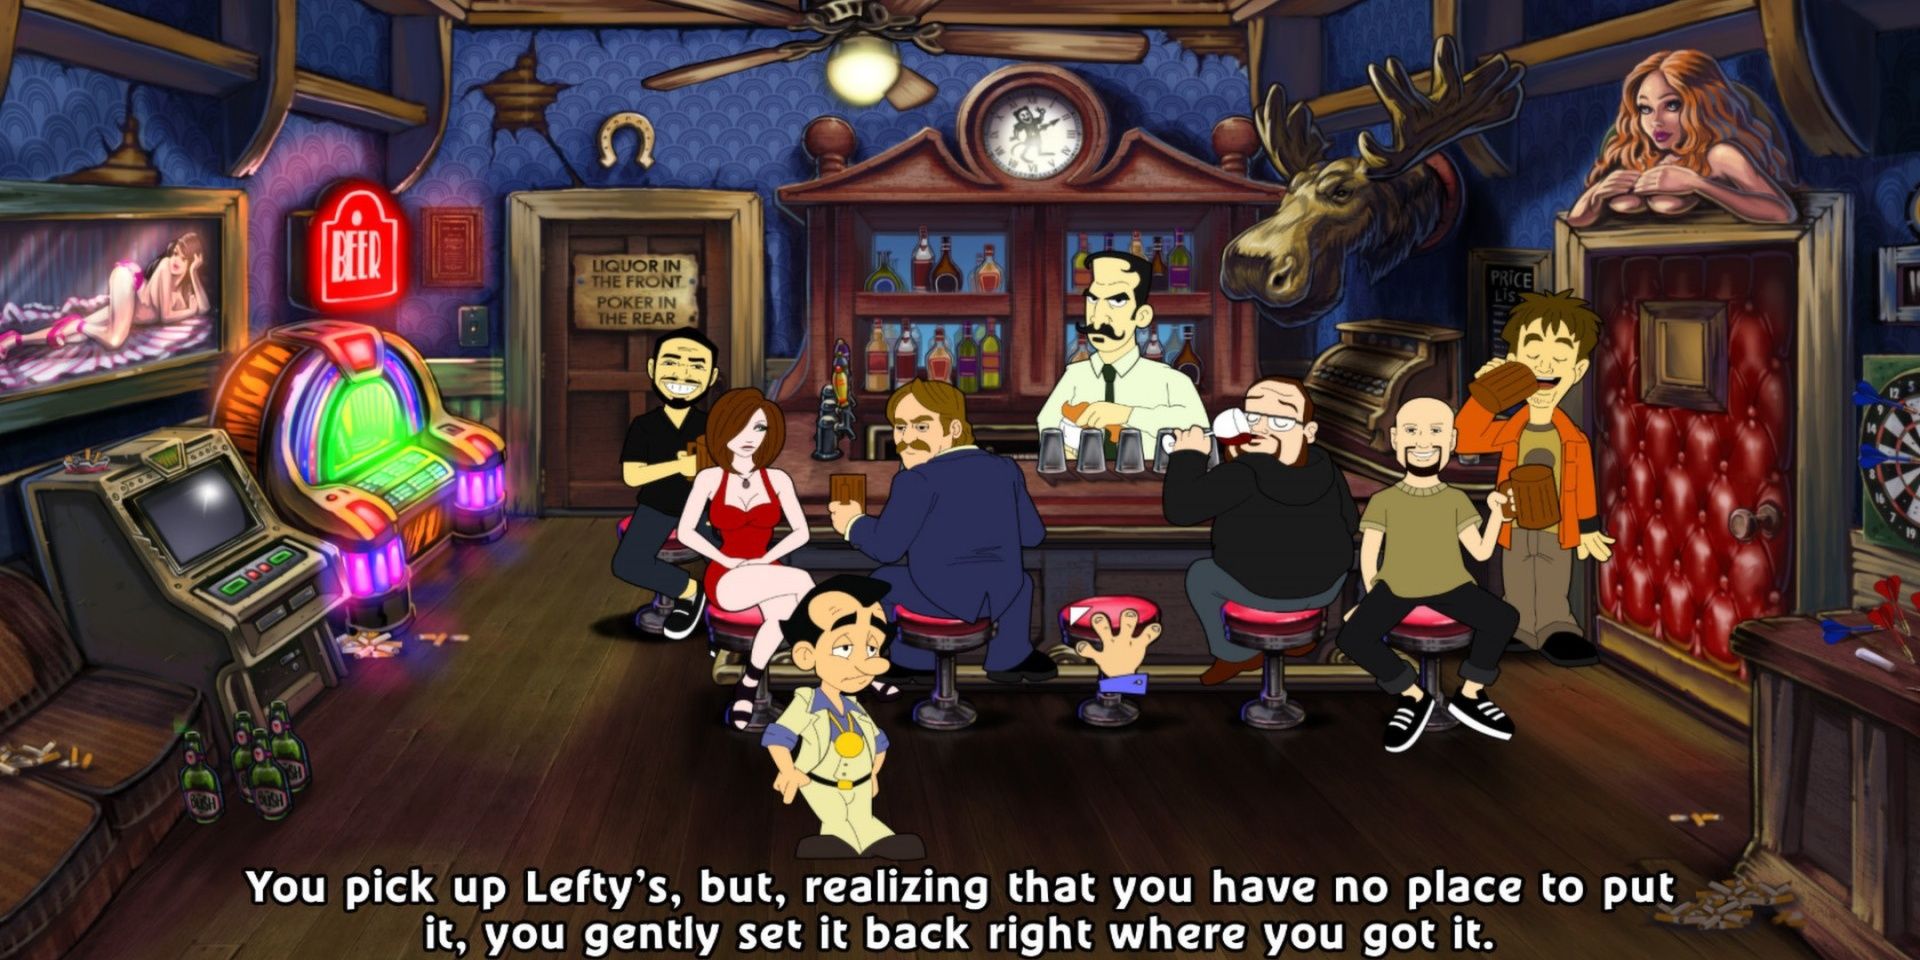 Gameplay from Leisure Suit Larry Reloaded on Steam